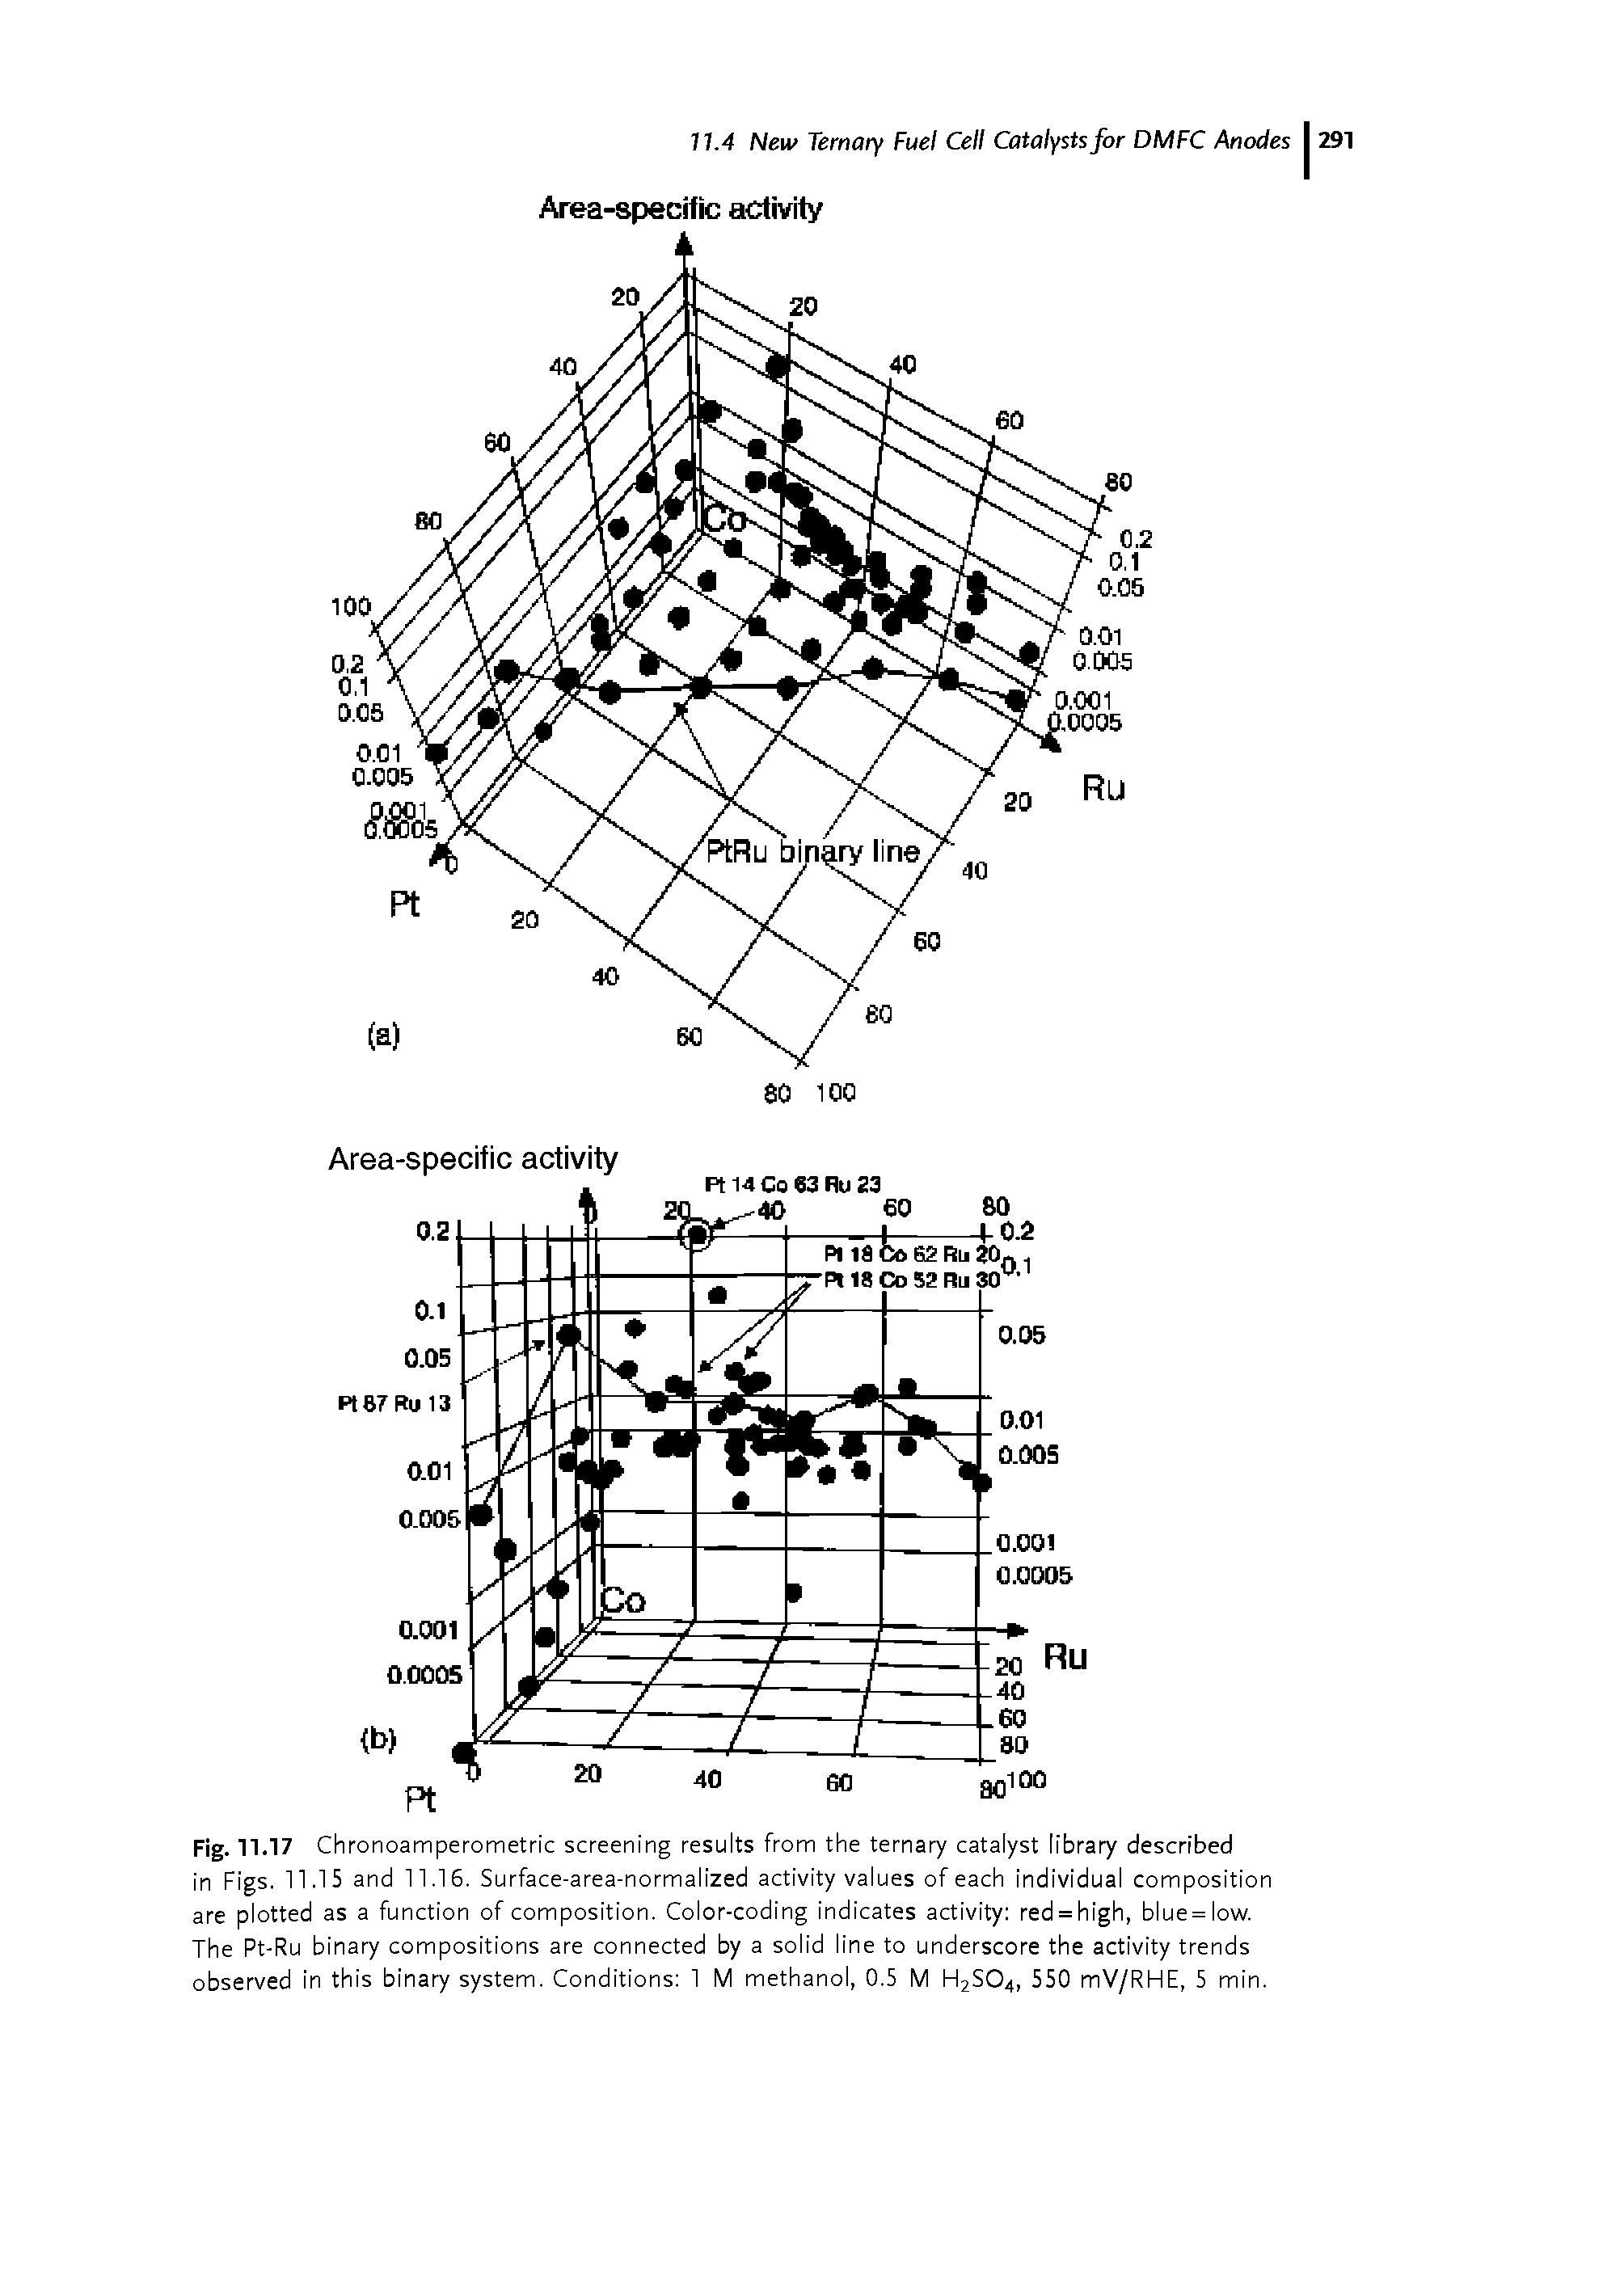 Fig. 11.17 Chronoamperometric screening results from the ternary catalyst library described in Figs. 11.15 and 11.16. Surface-area-normalized activity values of each individual composition are plotted as a function of composition. Color-coding indicates activity red = high, blue = low. The pt-Ru binary compositions are connected by a solid line to underscore the activity trends observed in this binary system. Conditions 1 M methanol, 0.5 M H2S04, 550 mV/RHE, 5 min.